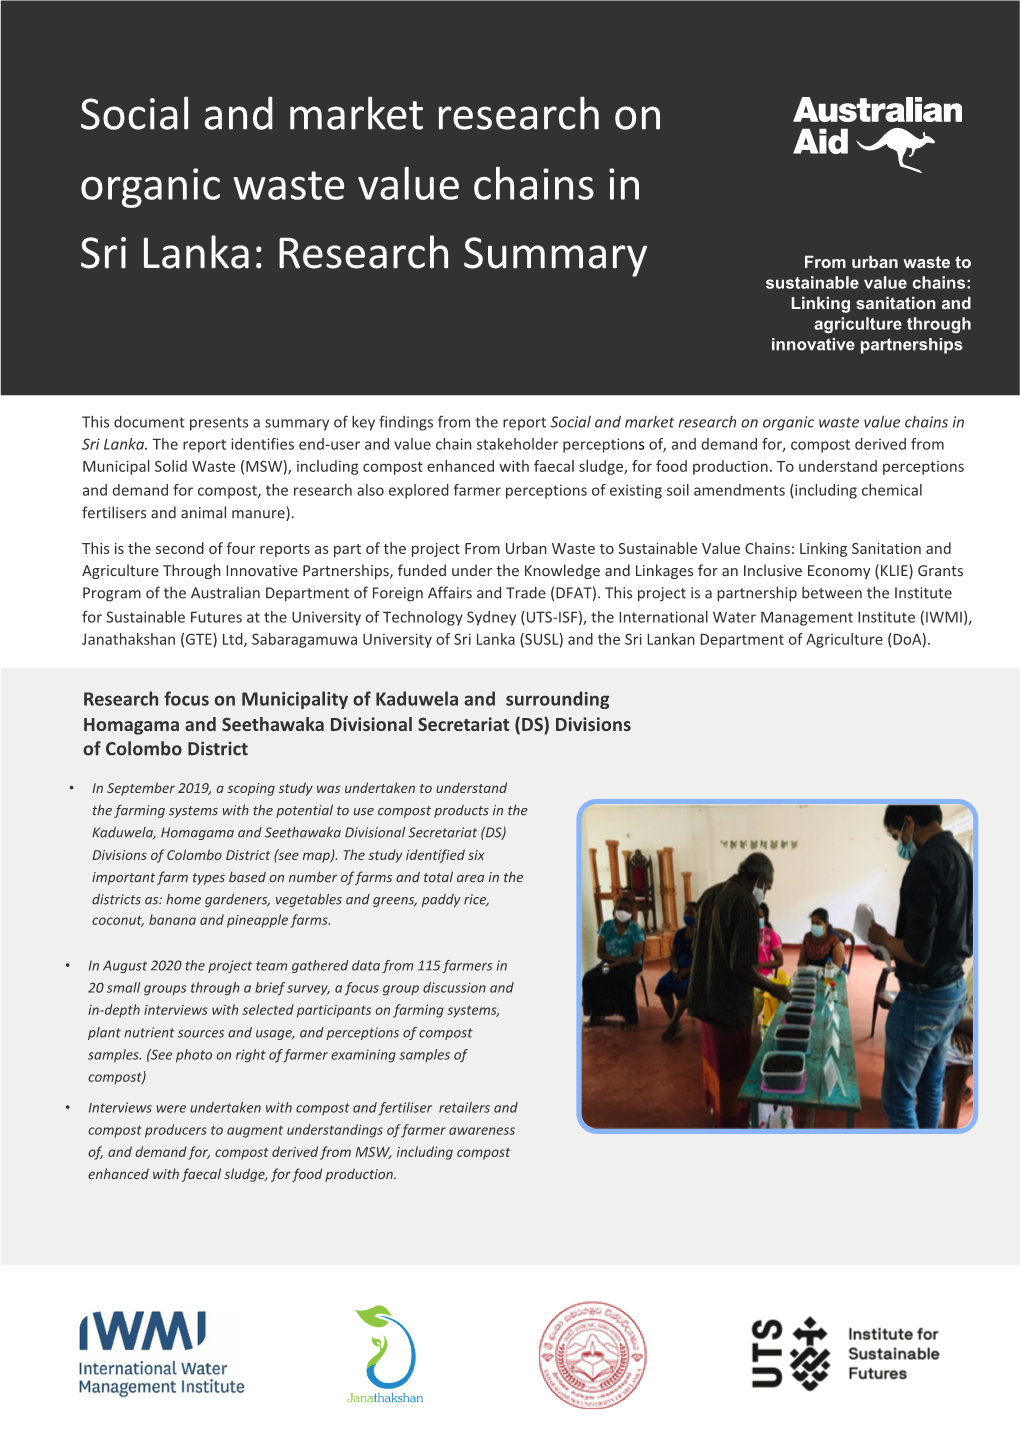 Social and Market Research on Organic Waste Value Chains in Sri Lanka